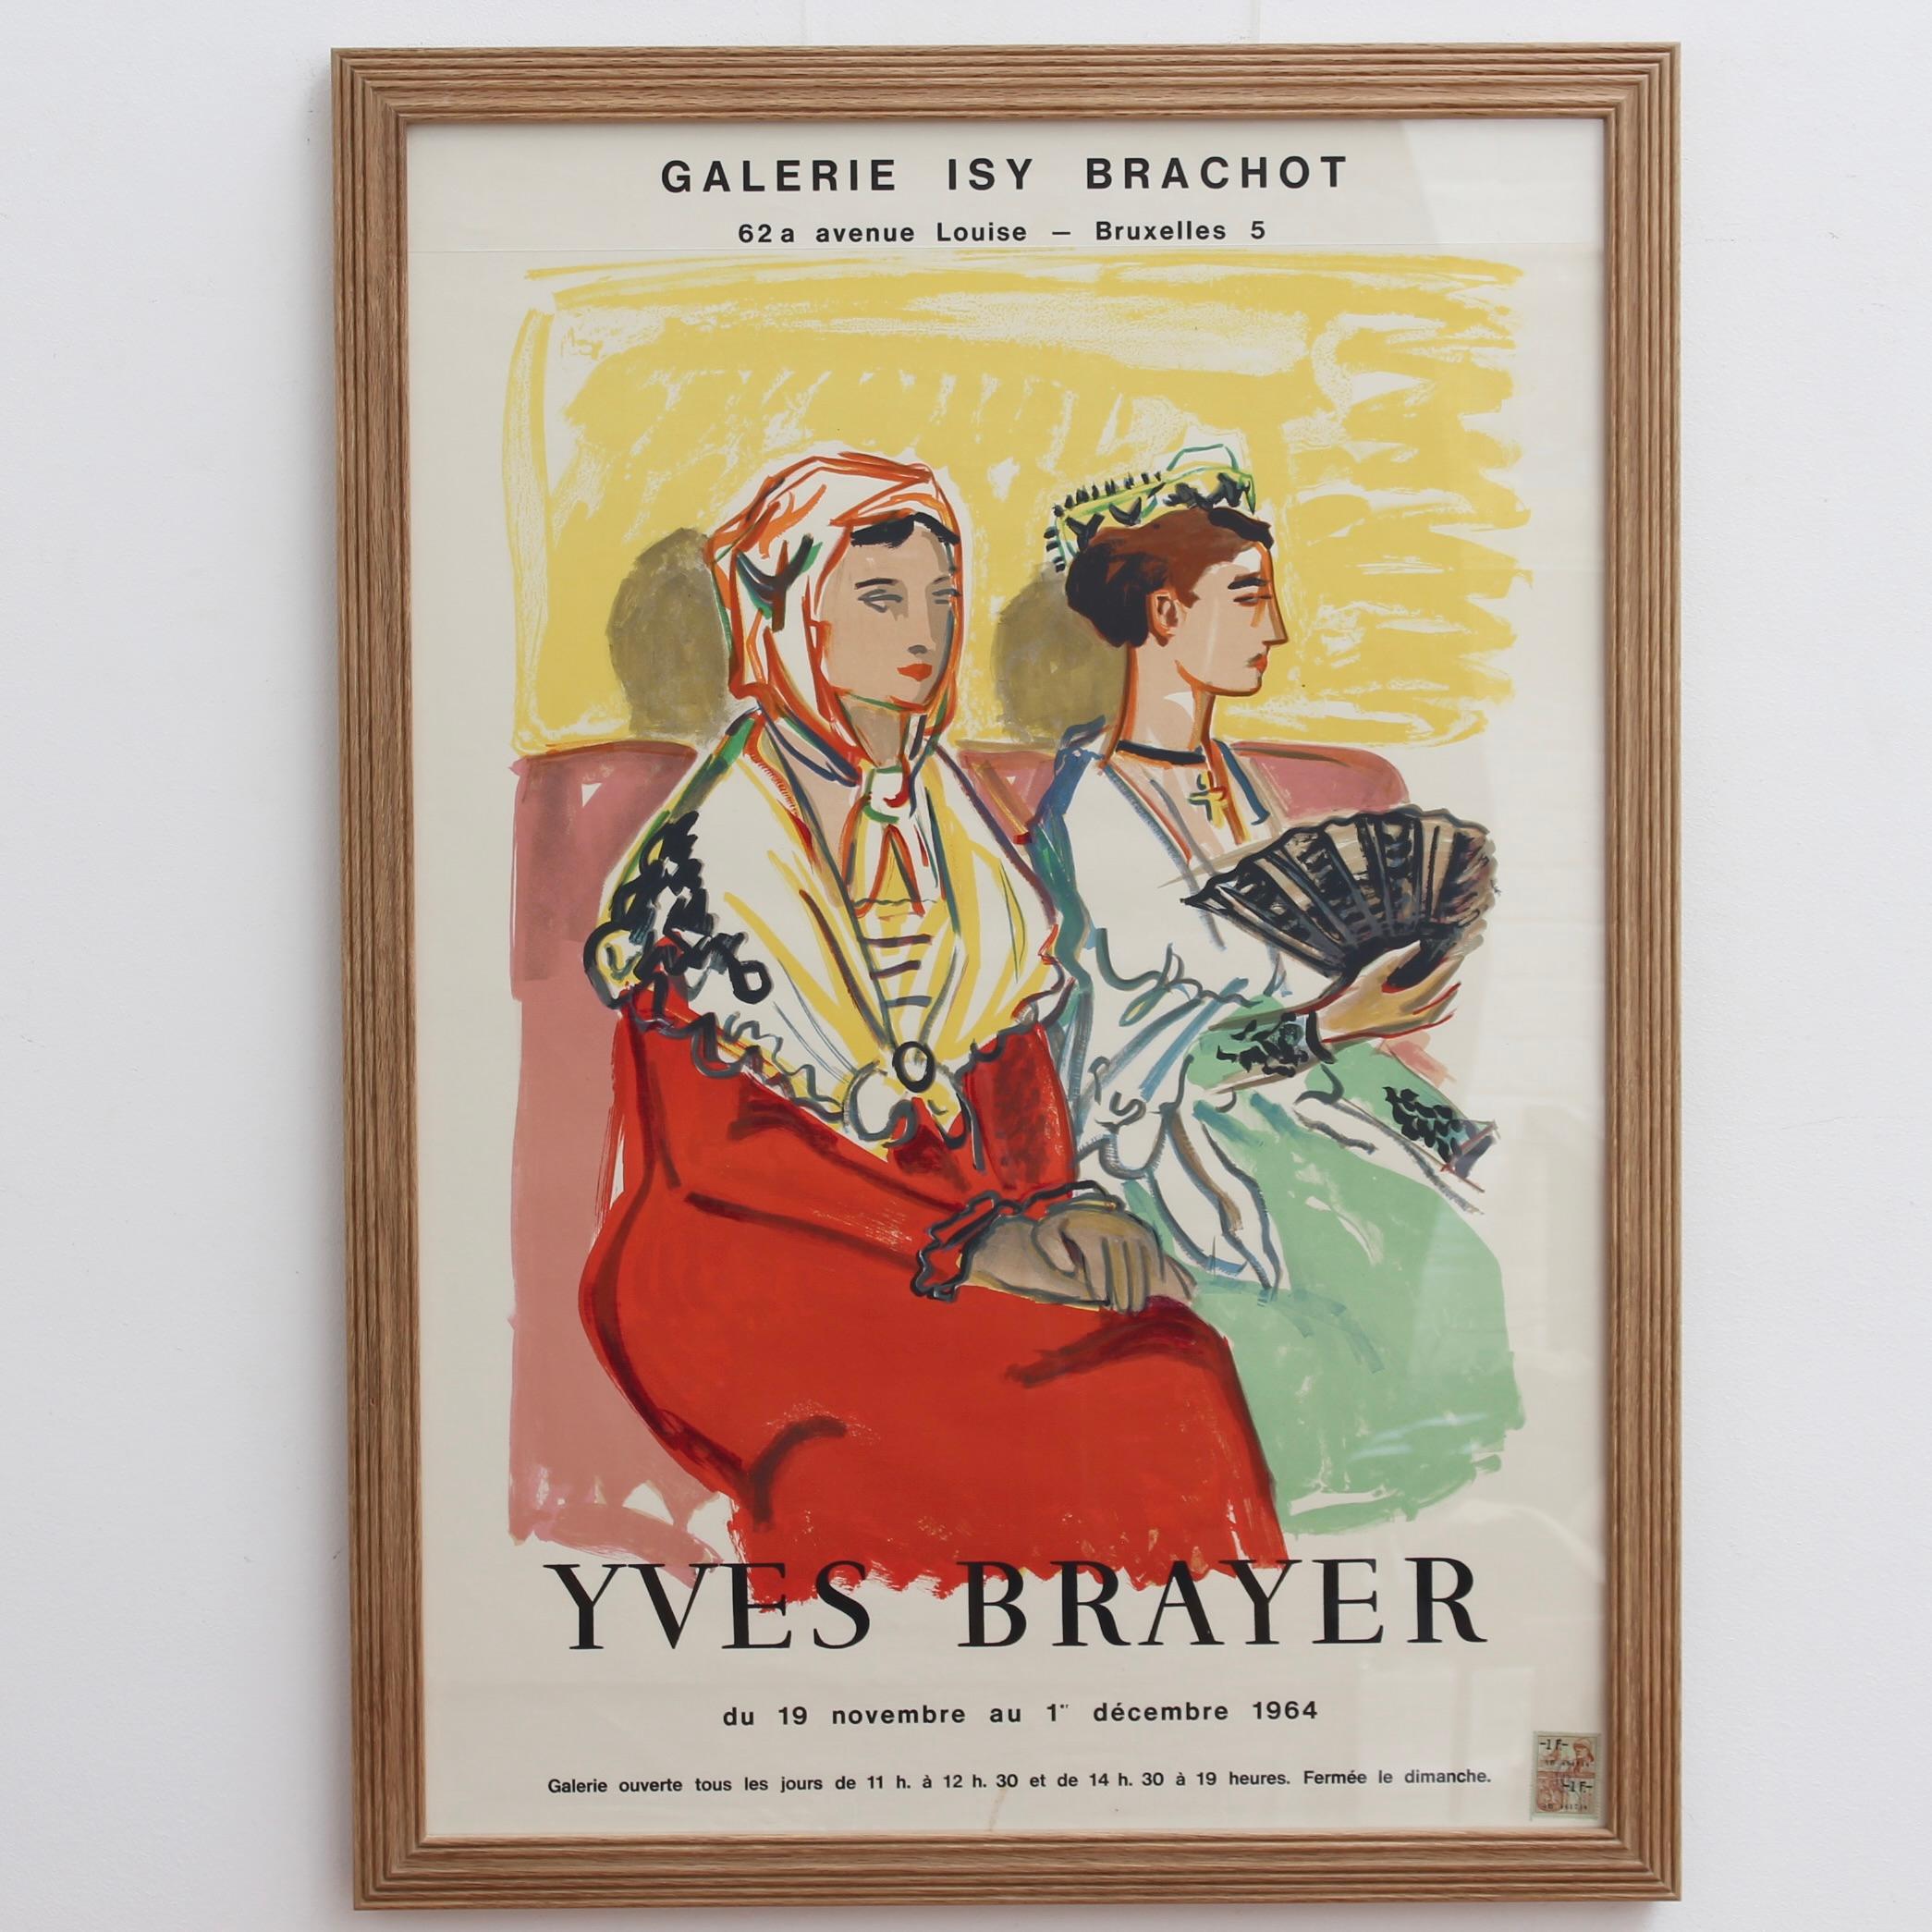 French Vintage Exhibition Poster for Yves Brayer - Galerie Isy Brachot Brussels For Sale 3